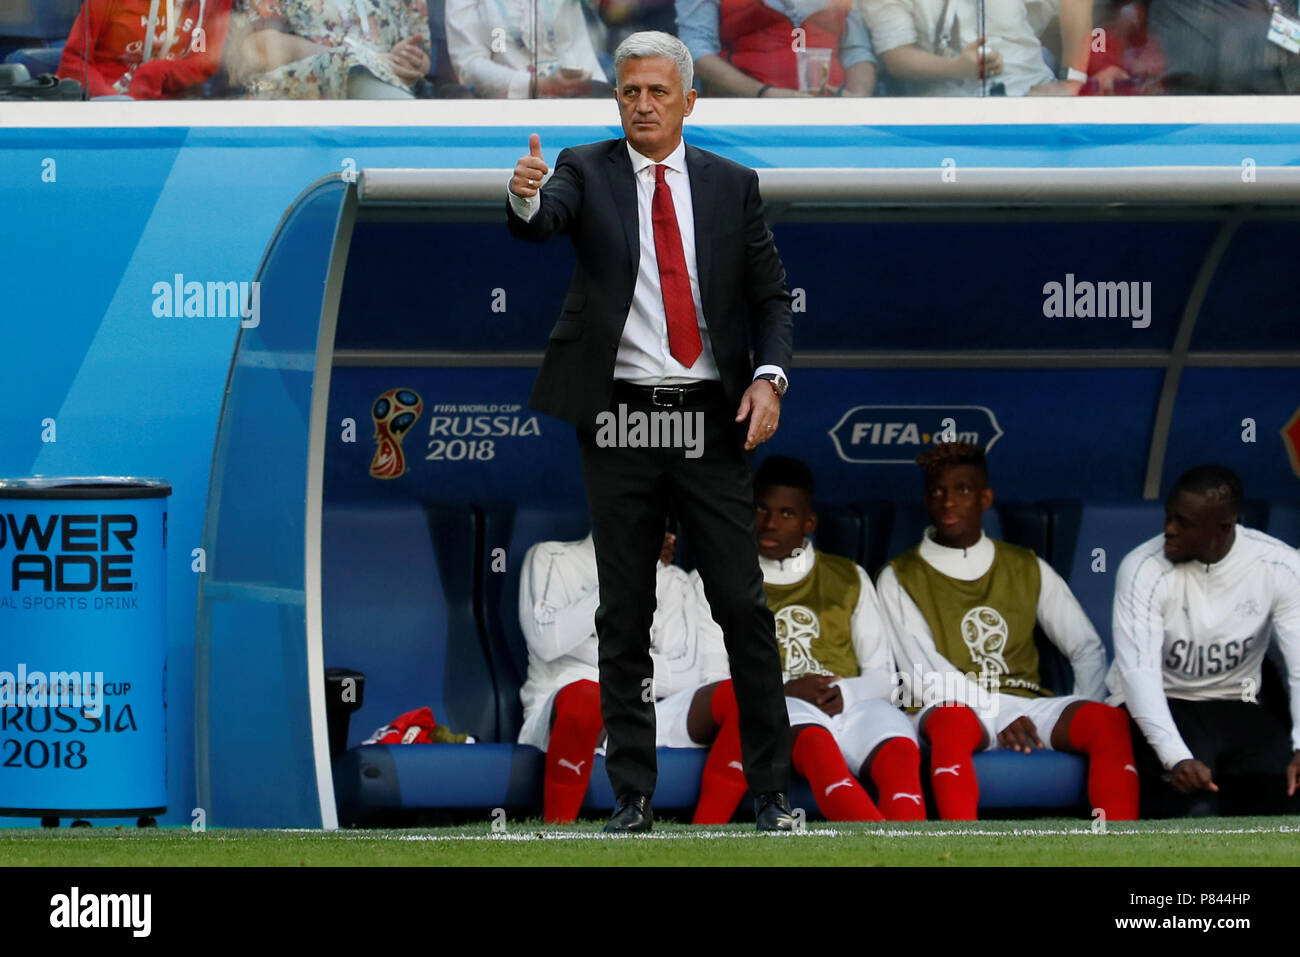 SAINT PETERSBURG, RUSSIA - JULY 3: Switzerland national team head coach Vladimir Petkovic (C) gestures during the 2018 FIFA World Cup Russia Round of 16 match between Sweden and Switzerland at Saint Petersburg Stadium on July 3, 2018 in Saint Petersburg, Russia. (MB Media) Stock Photo